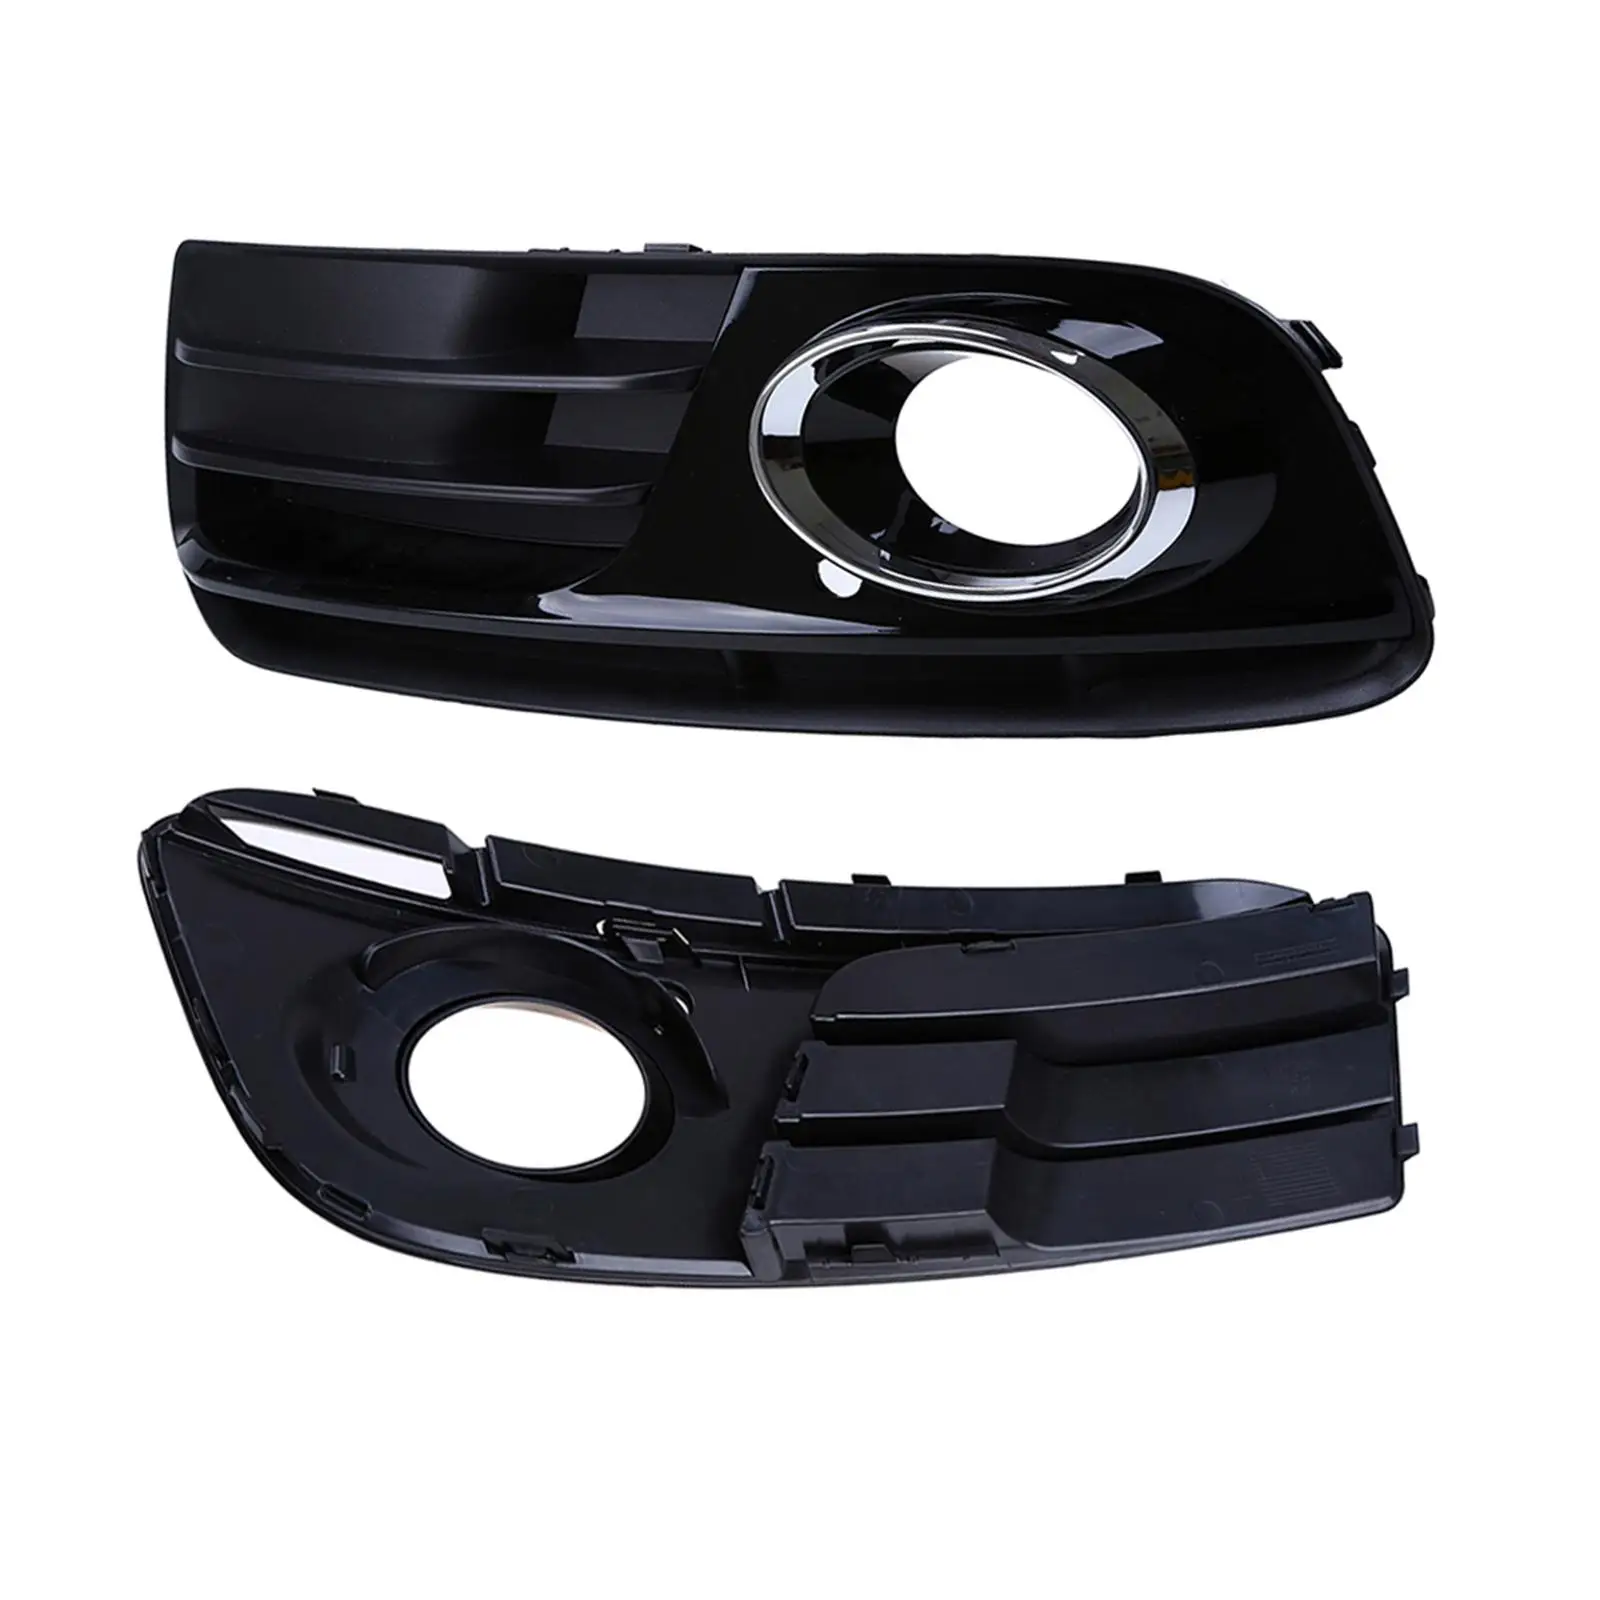 Fog Light Lamp Grill Car Direct Replaces Front Bumper Part Easy to Install 8R0807682 Professional for Audi Q5 2013-2016